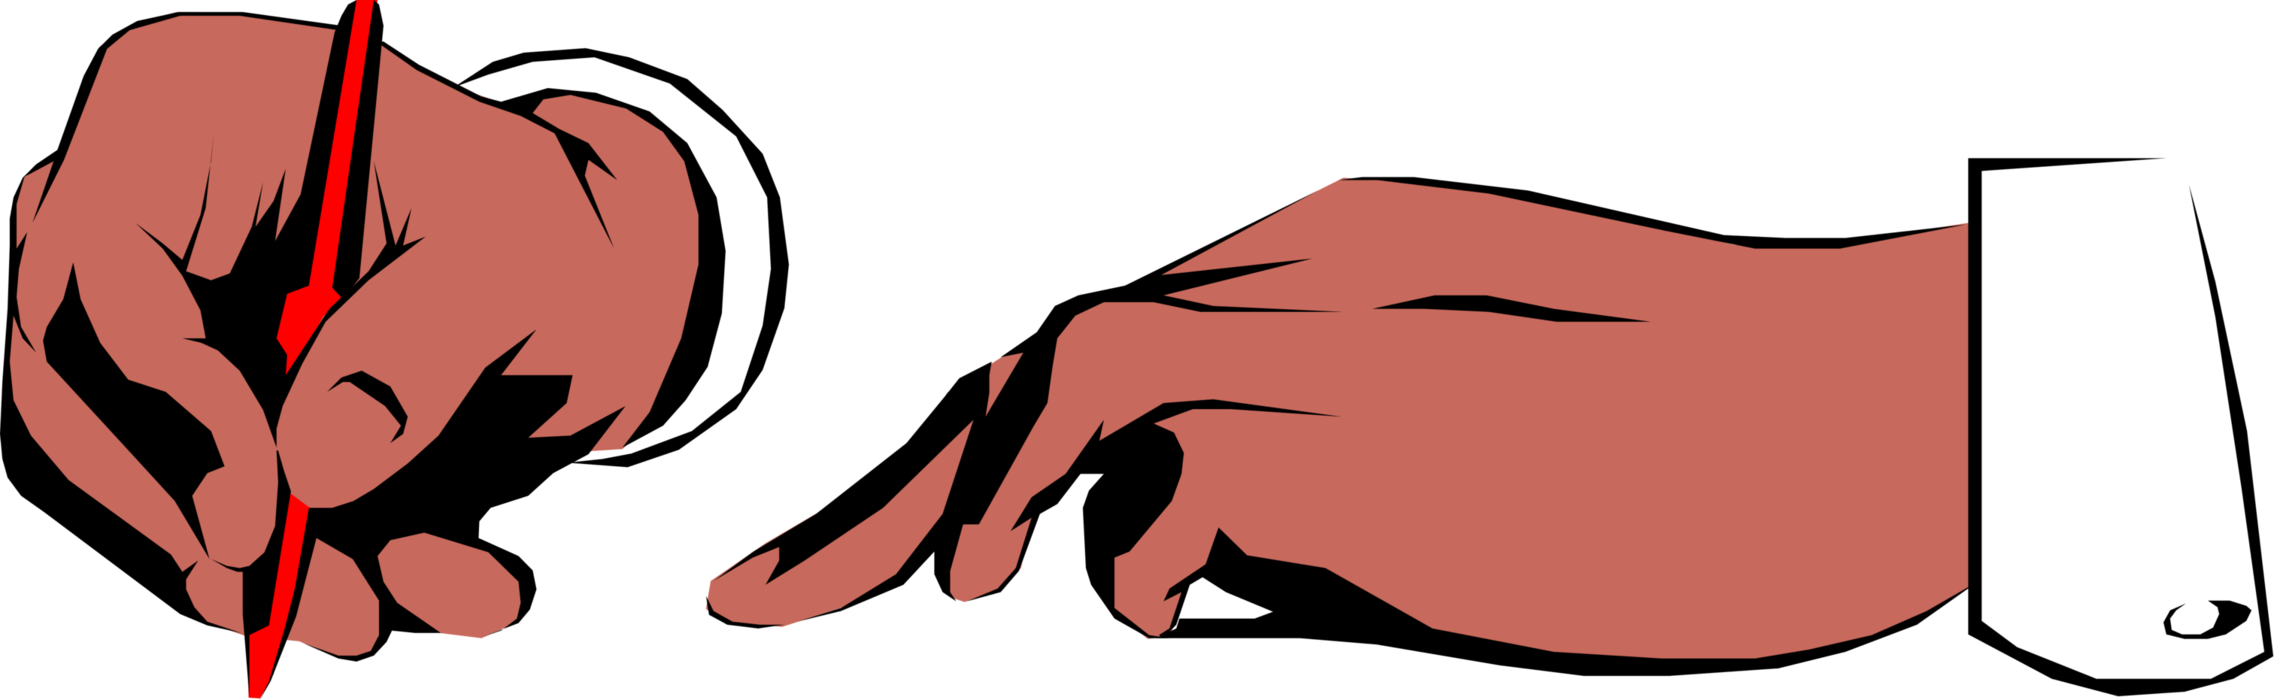 Vector Illustration of African American Hands Writing with Red Pen Writing Instrument